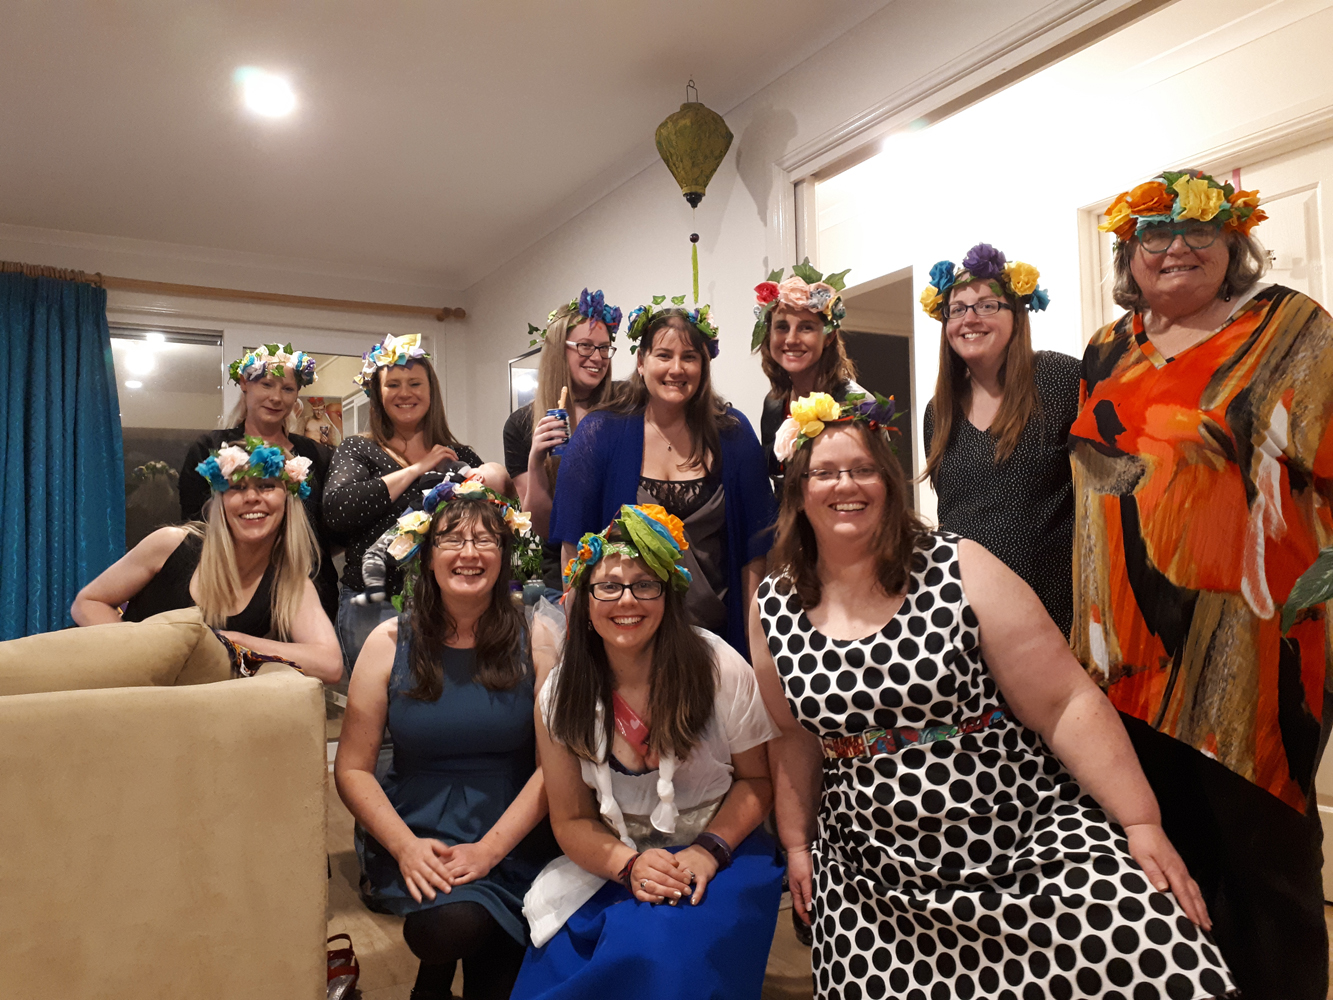 A Crafty Hens Party